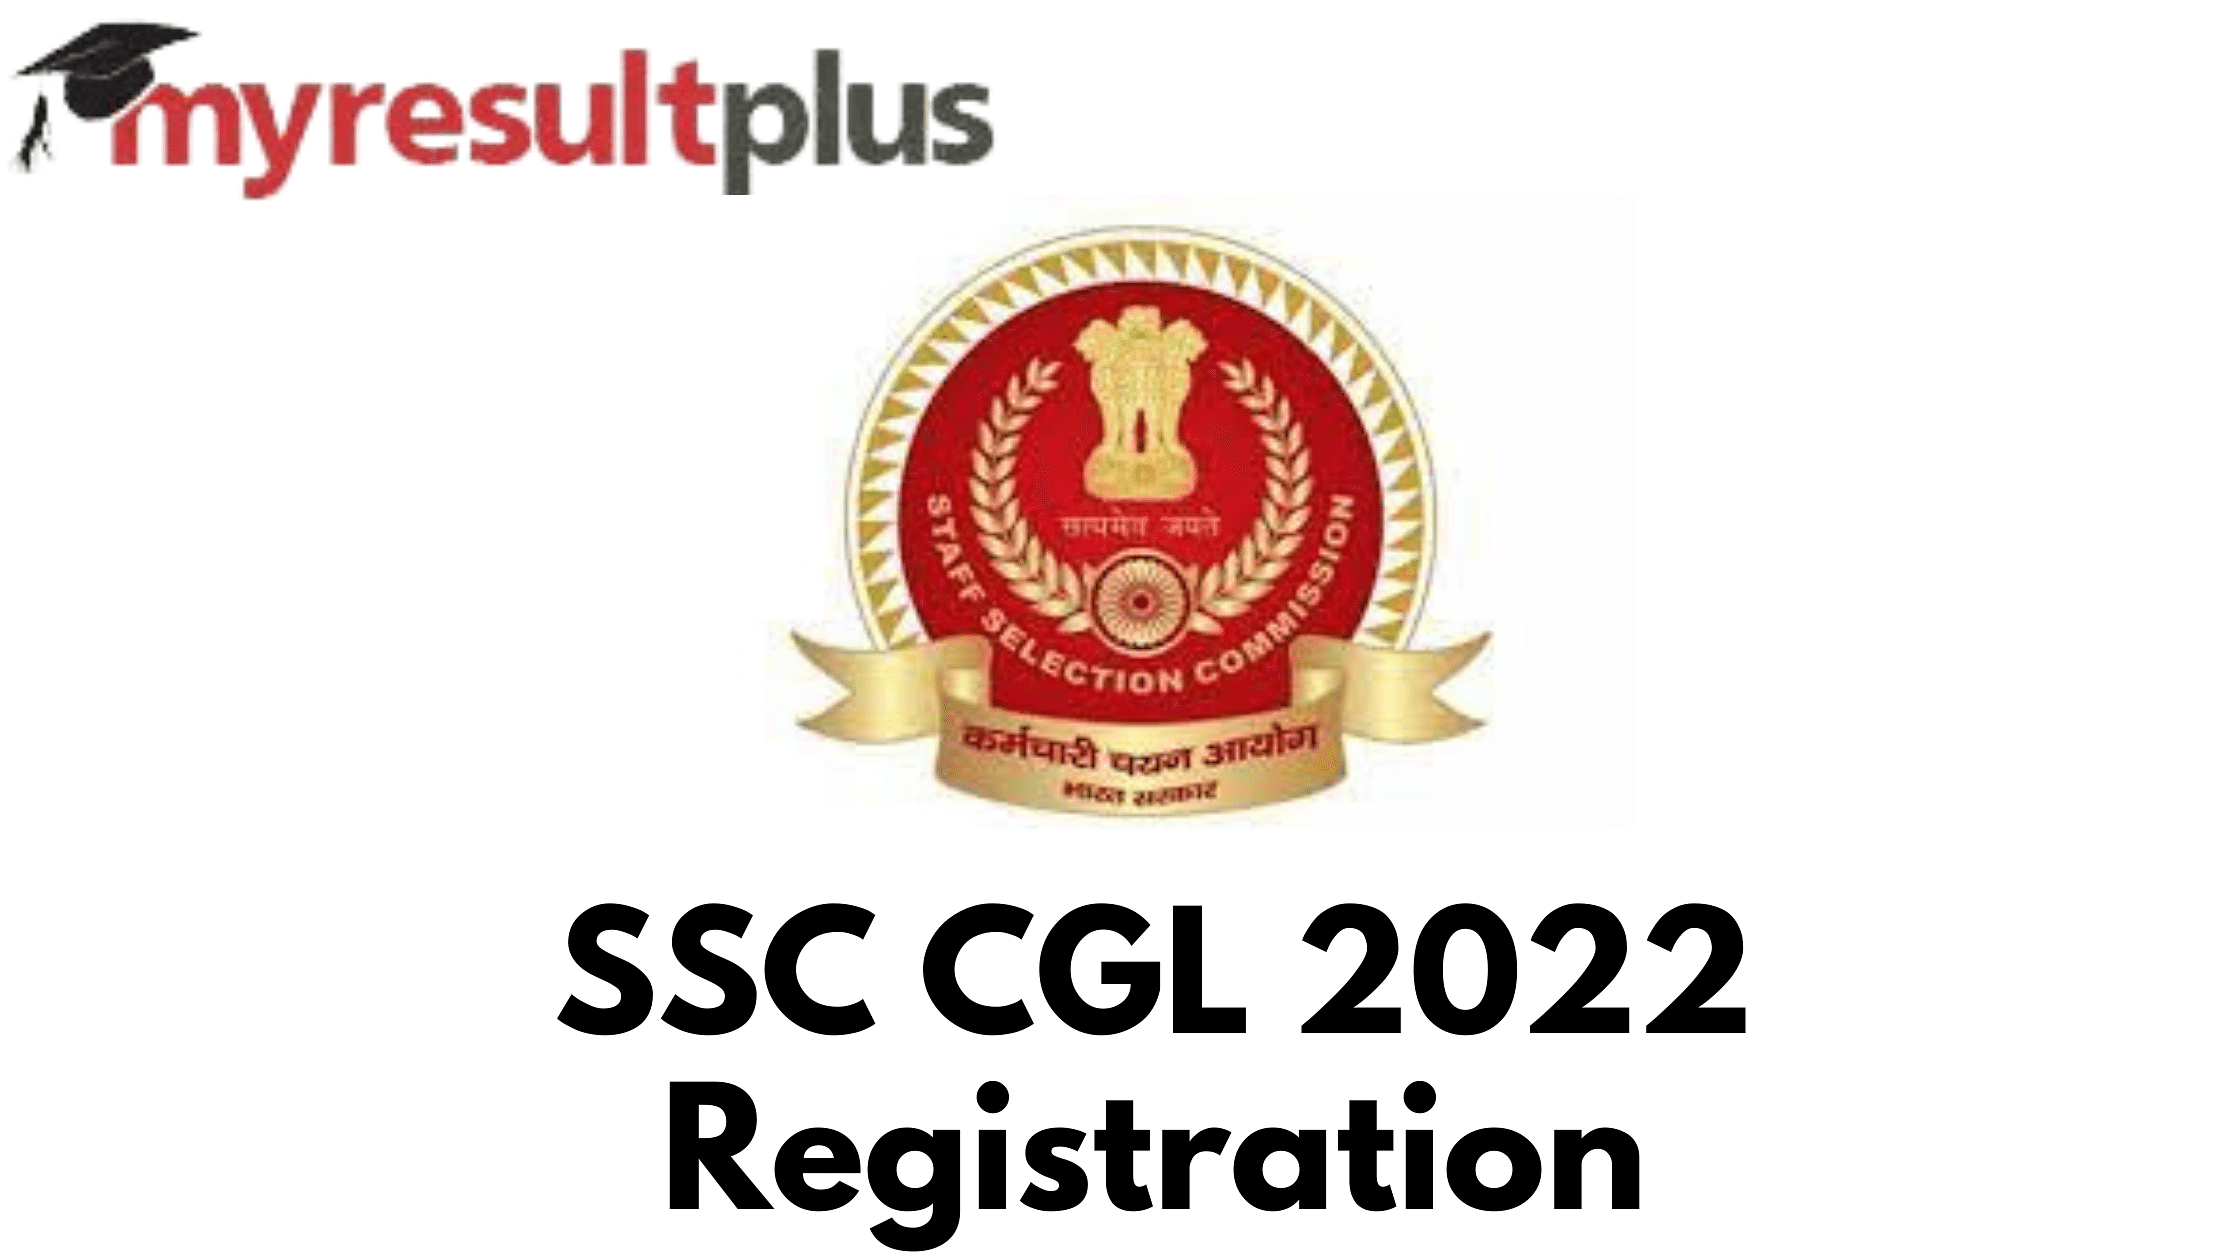 SSC CGL 2022: Registration Process Extended Till October 13, Guide to Apply Here